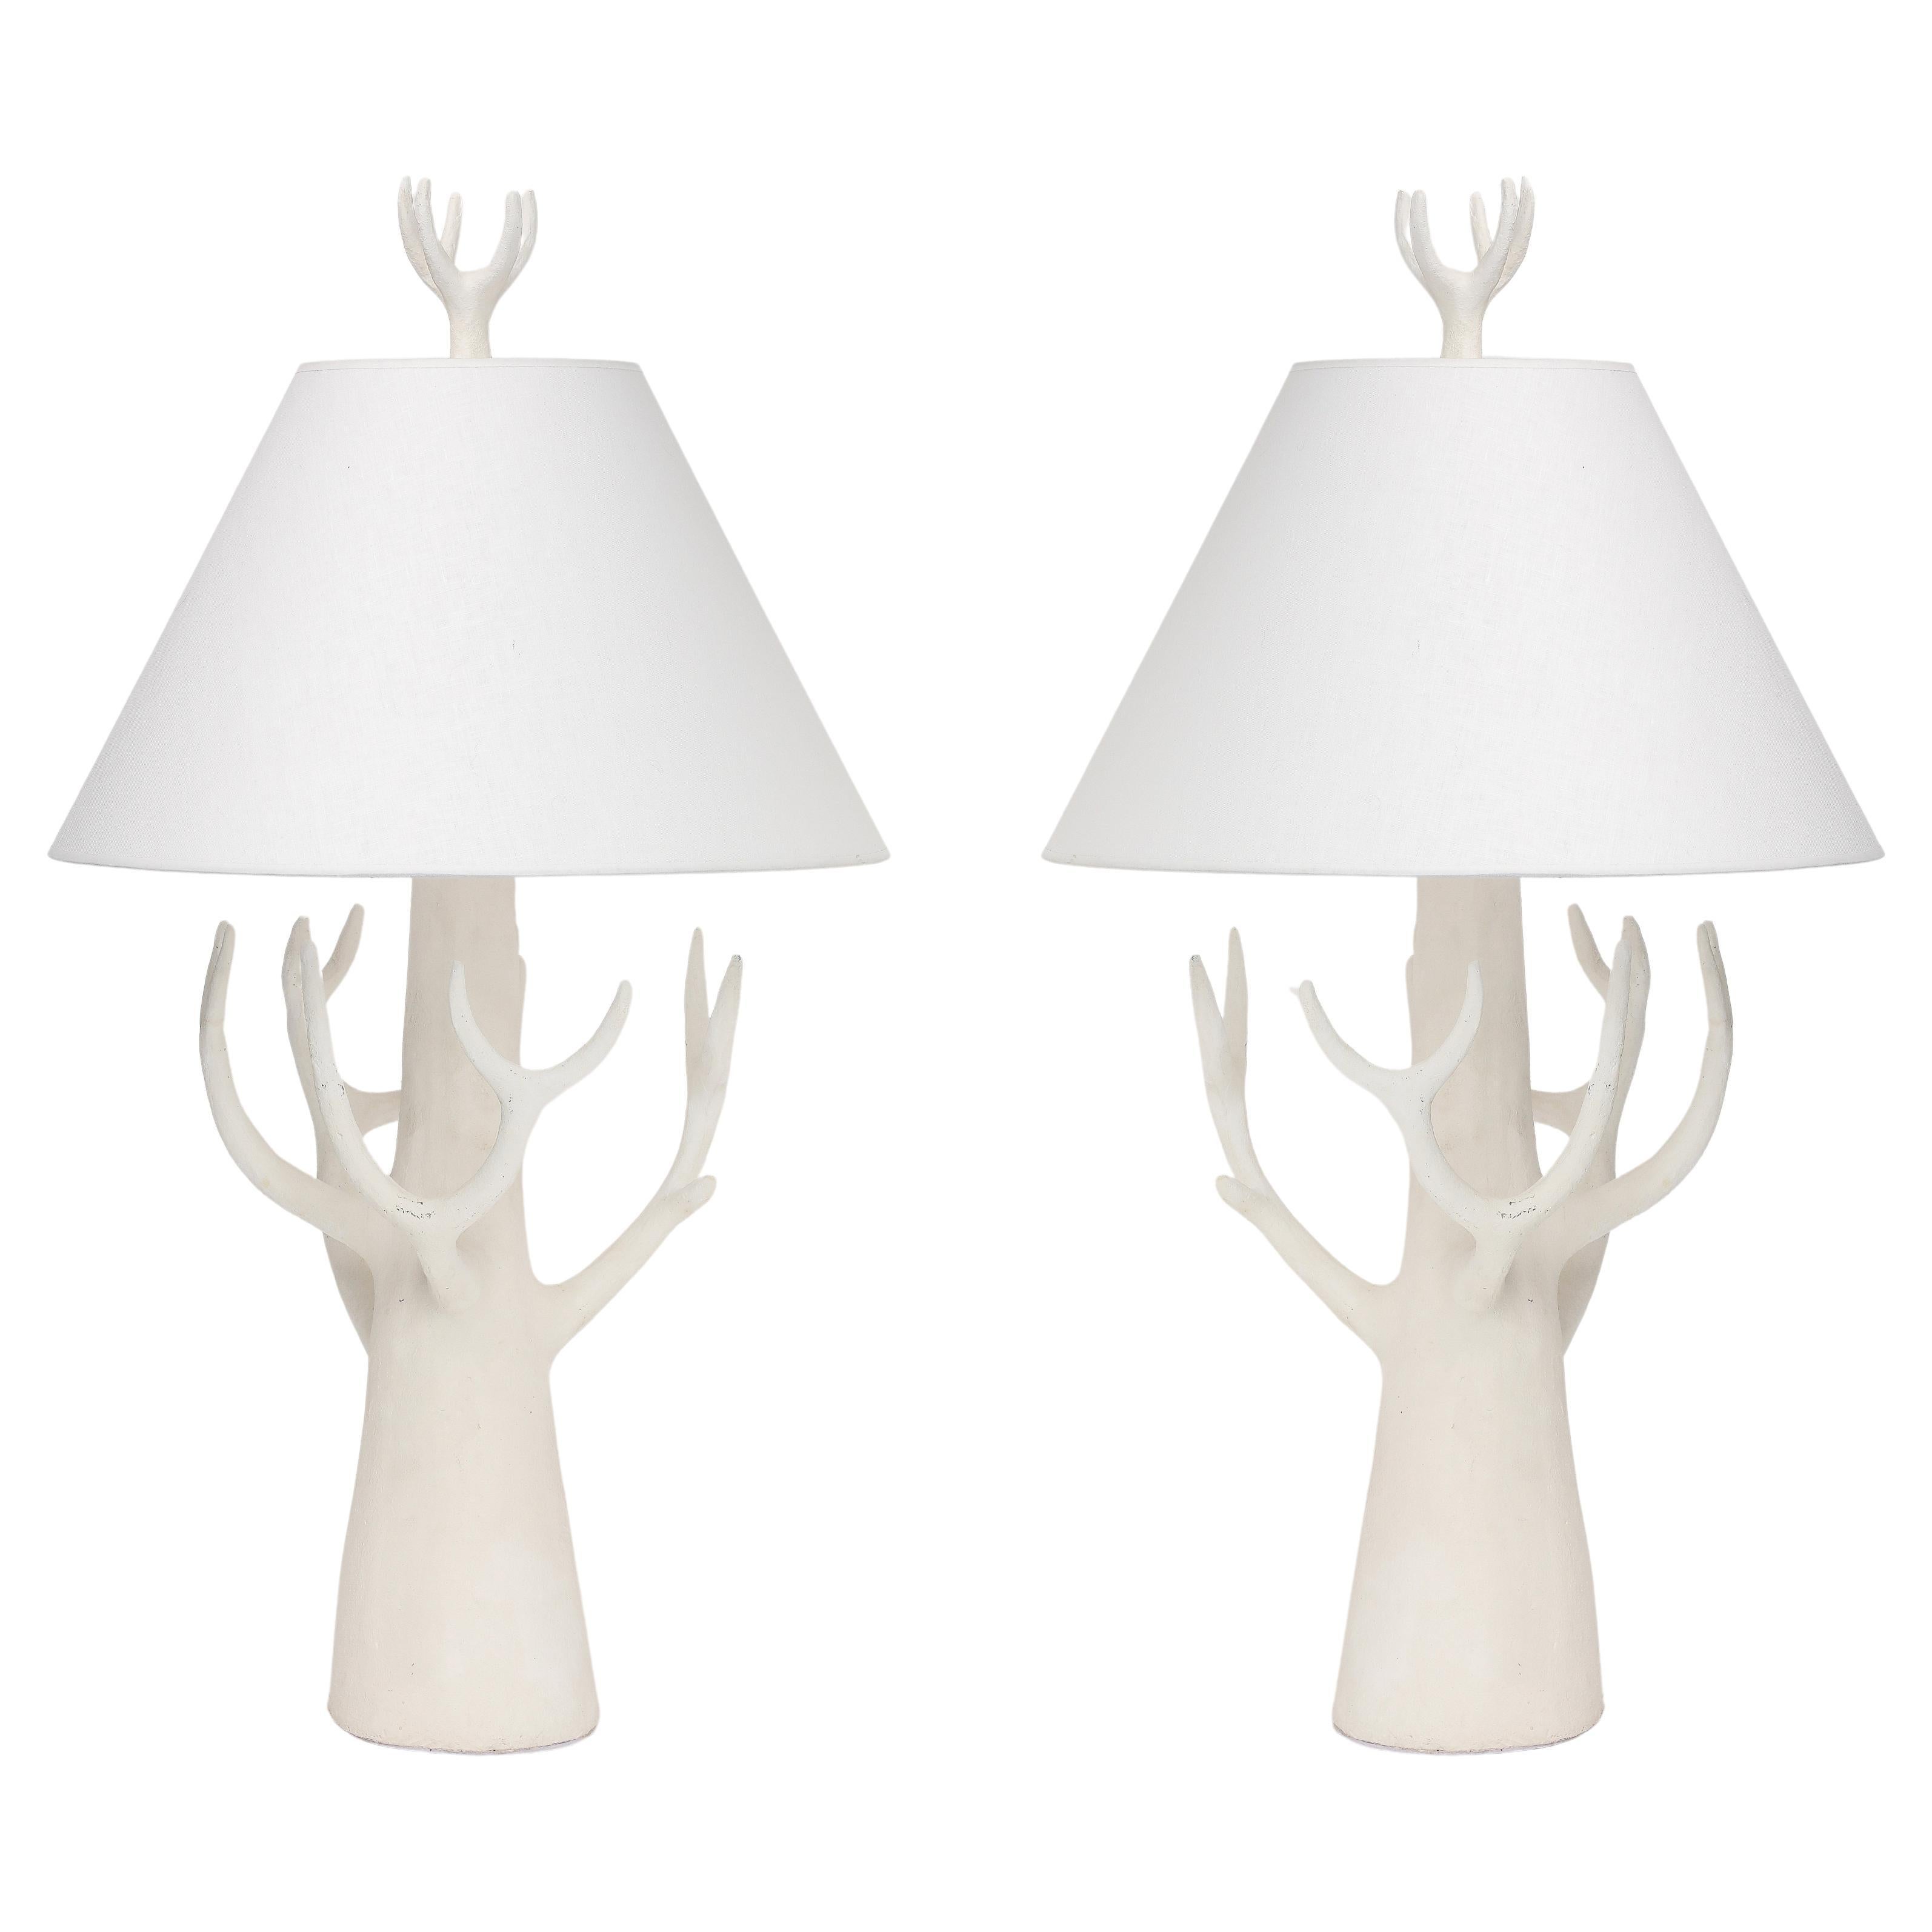 Jacques Darbaud Ceramic Table Lamps "Tree"